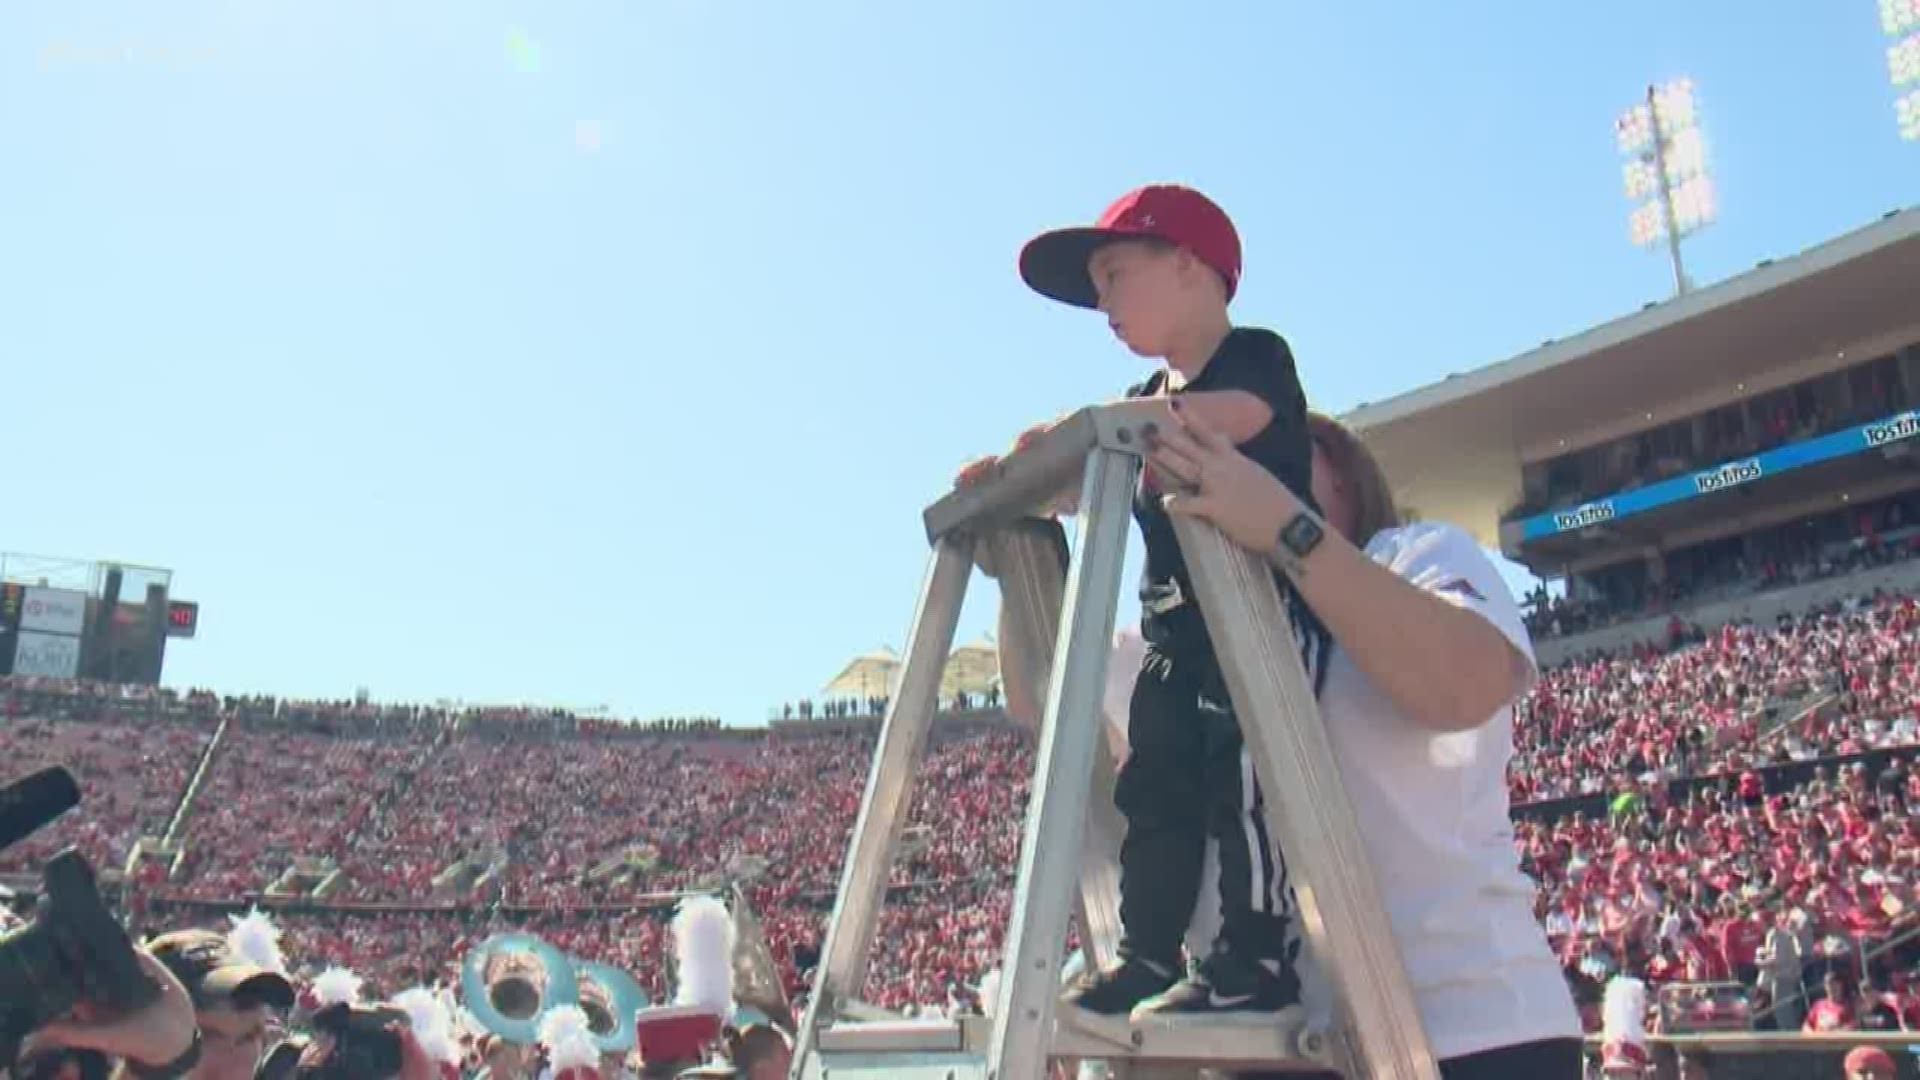 4-year-old Louisville superfan leads band during halftime